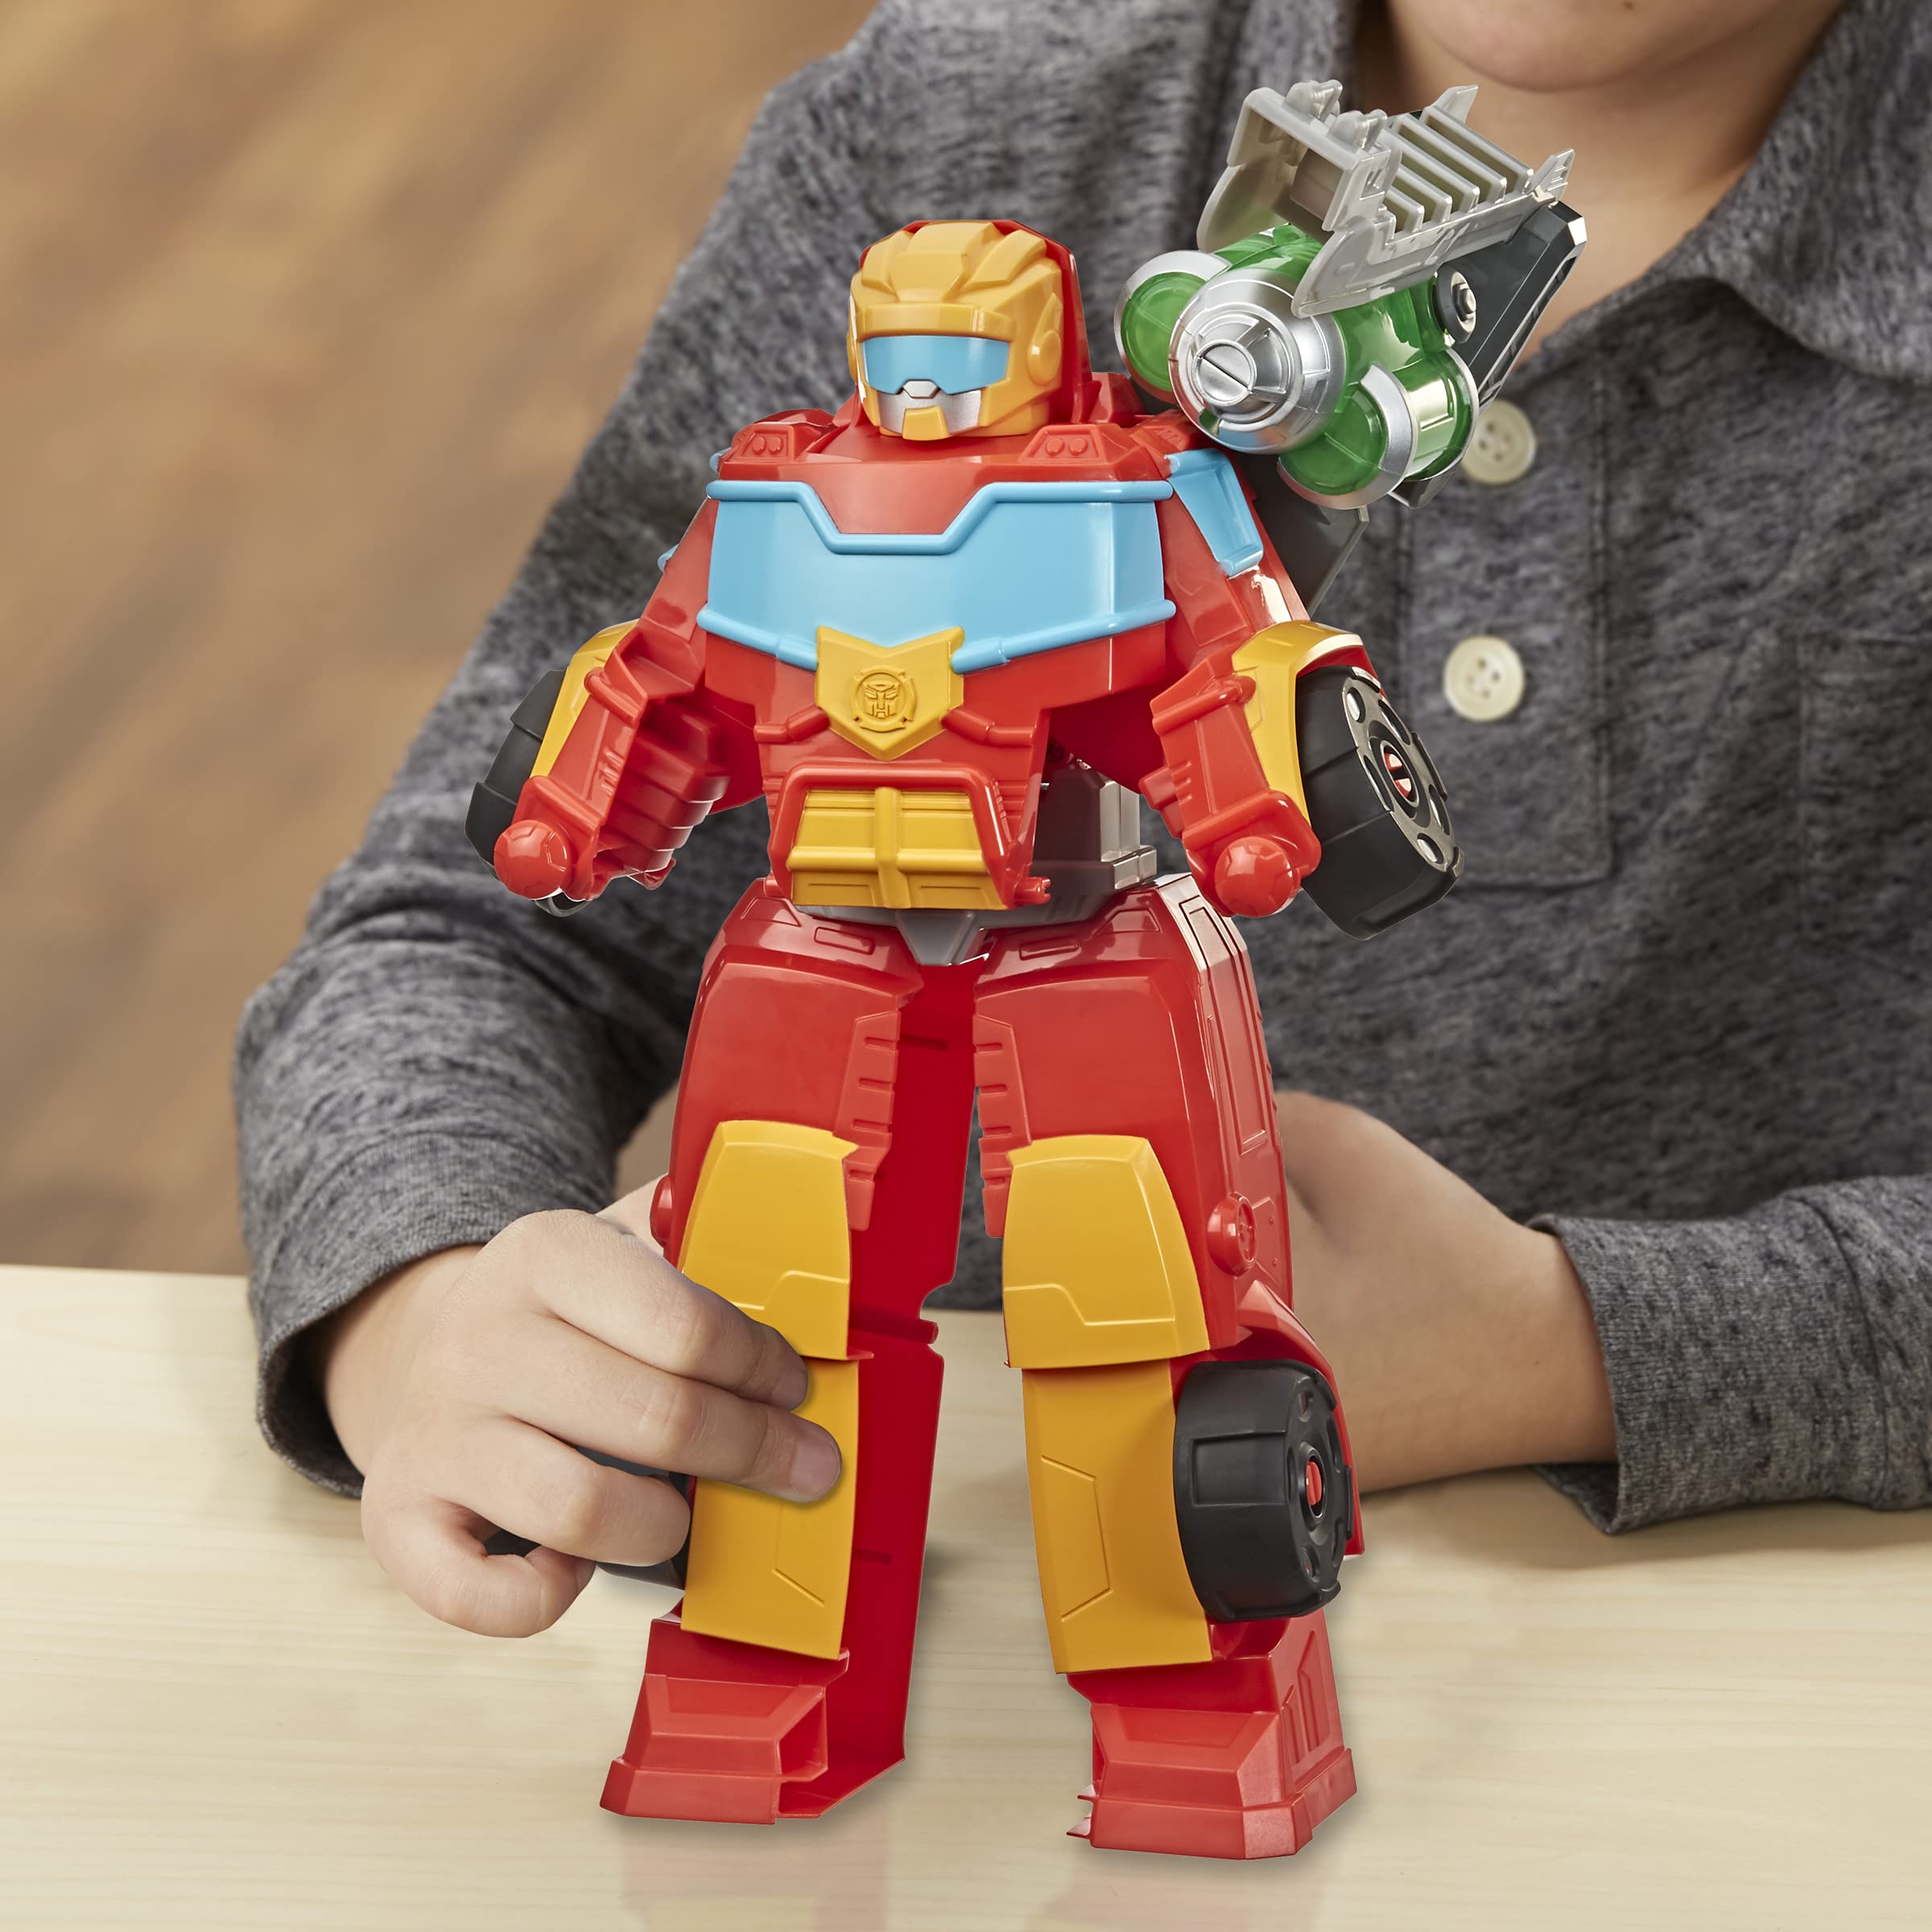 Transformers Playskool Heroes Rescue Bots Academy Rescue Power Hot Shot Converting Toy Robot, 14-Inch Collectible Action Figure Toy for Kids Ages 3 and Up